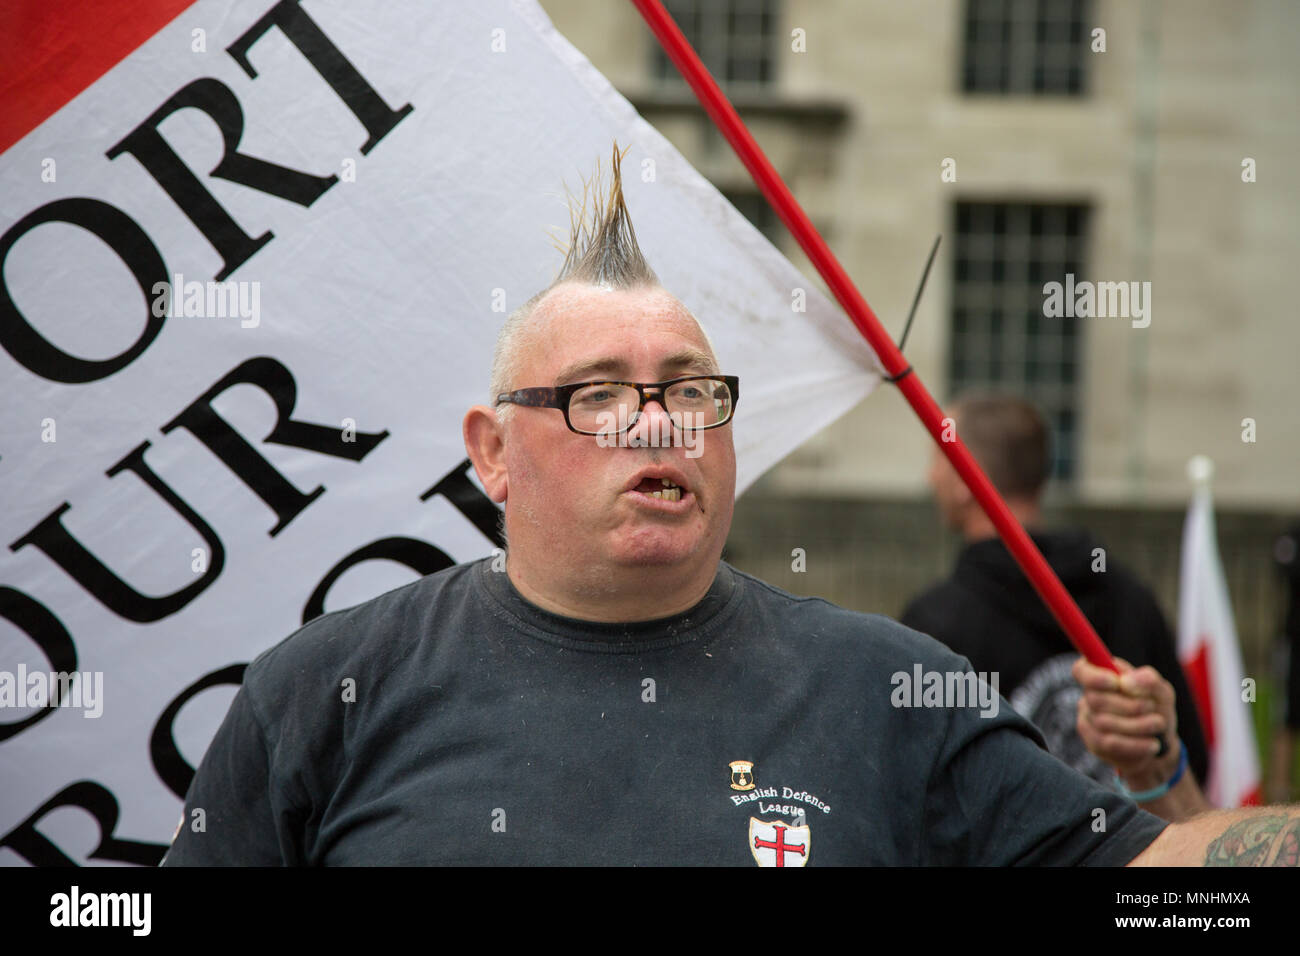 A member of the EDL stands in front of a support our troops banner Stock Photo